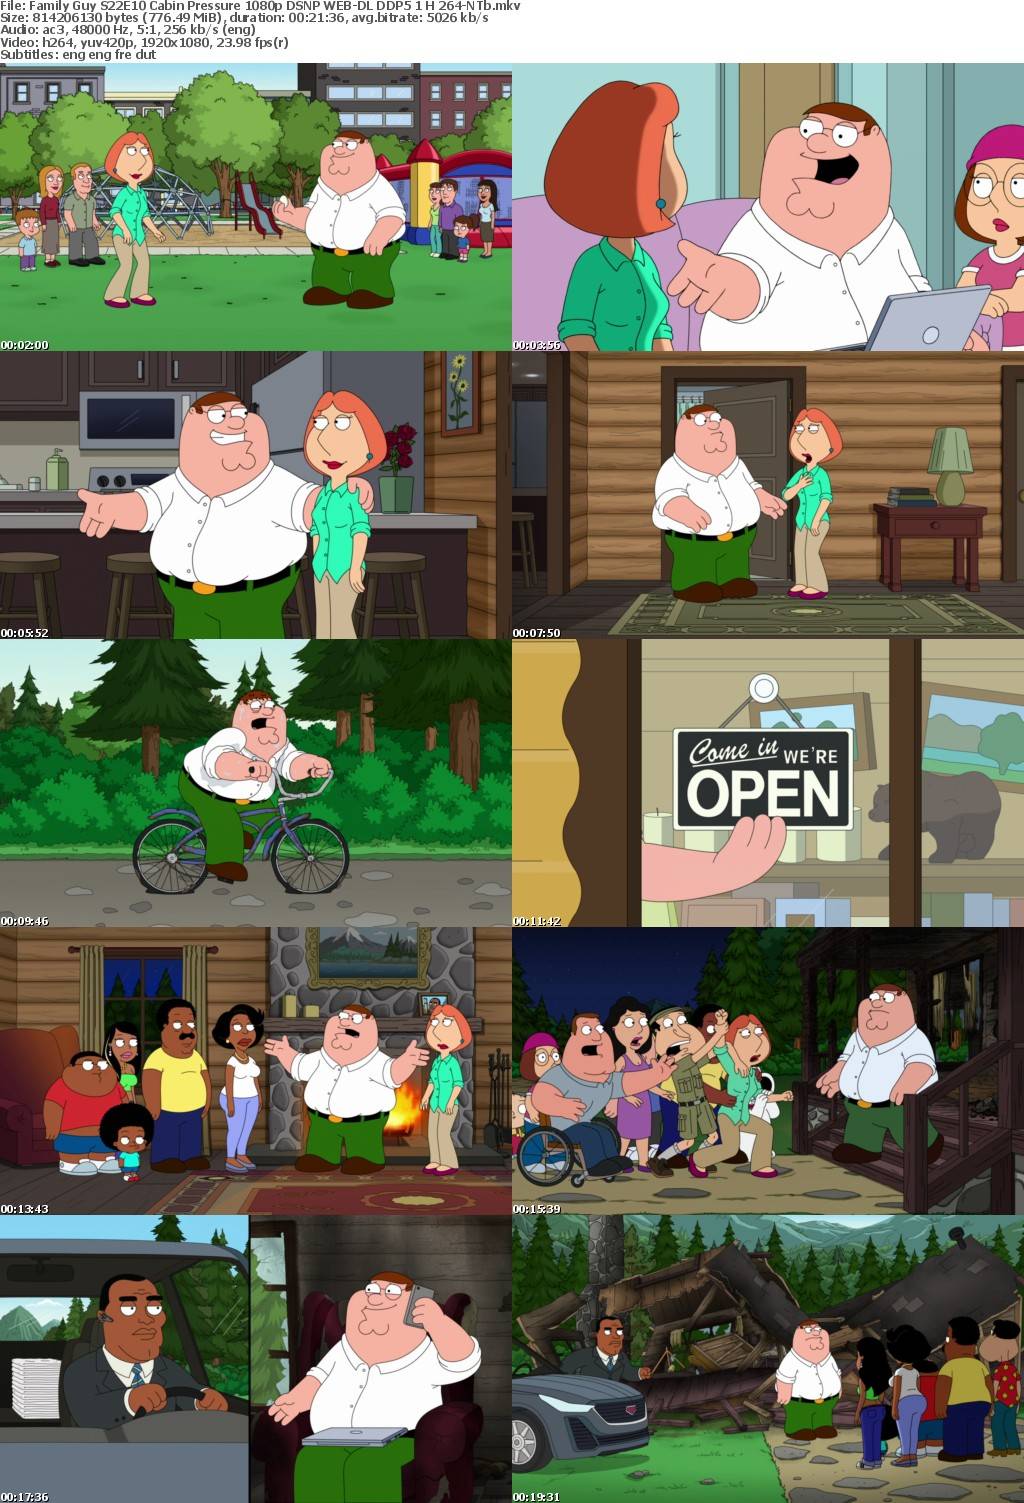 Family Guy S22E10 Cabin Pressure 1080p DSNP WEB-DL DDP5 1 H 264-NTb